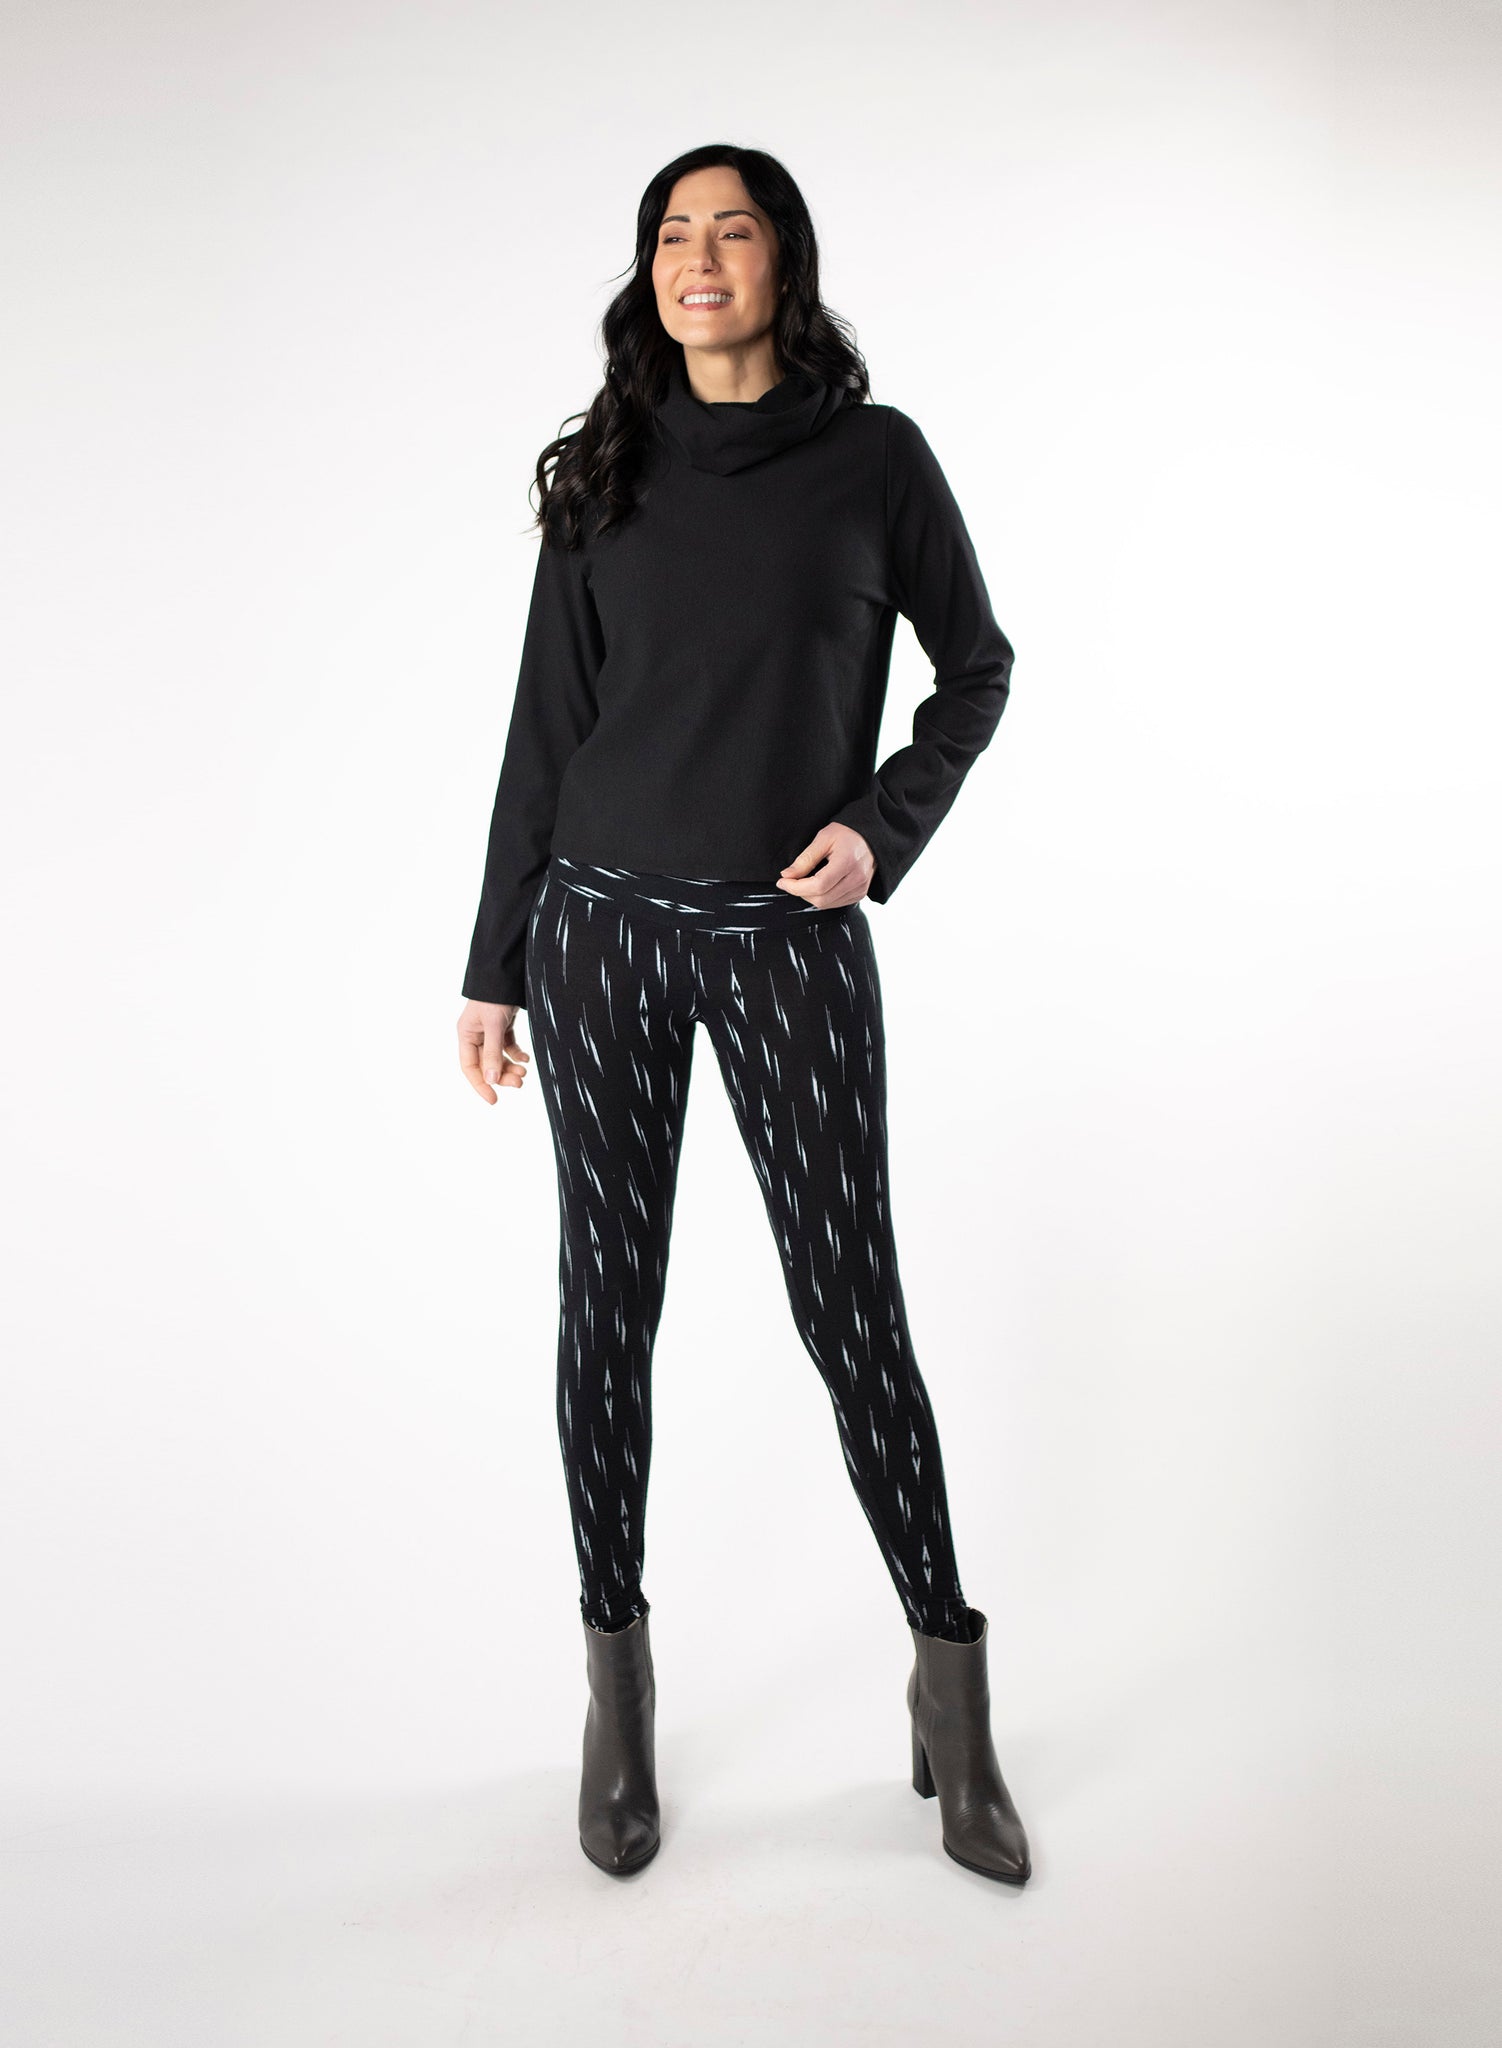 Black and White patterned bamboo leggings with a wide waistband. Styled with black cropped sweater